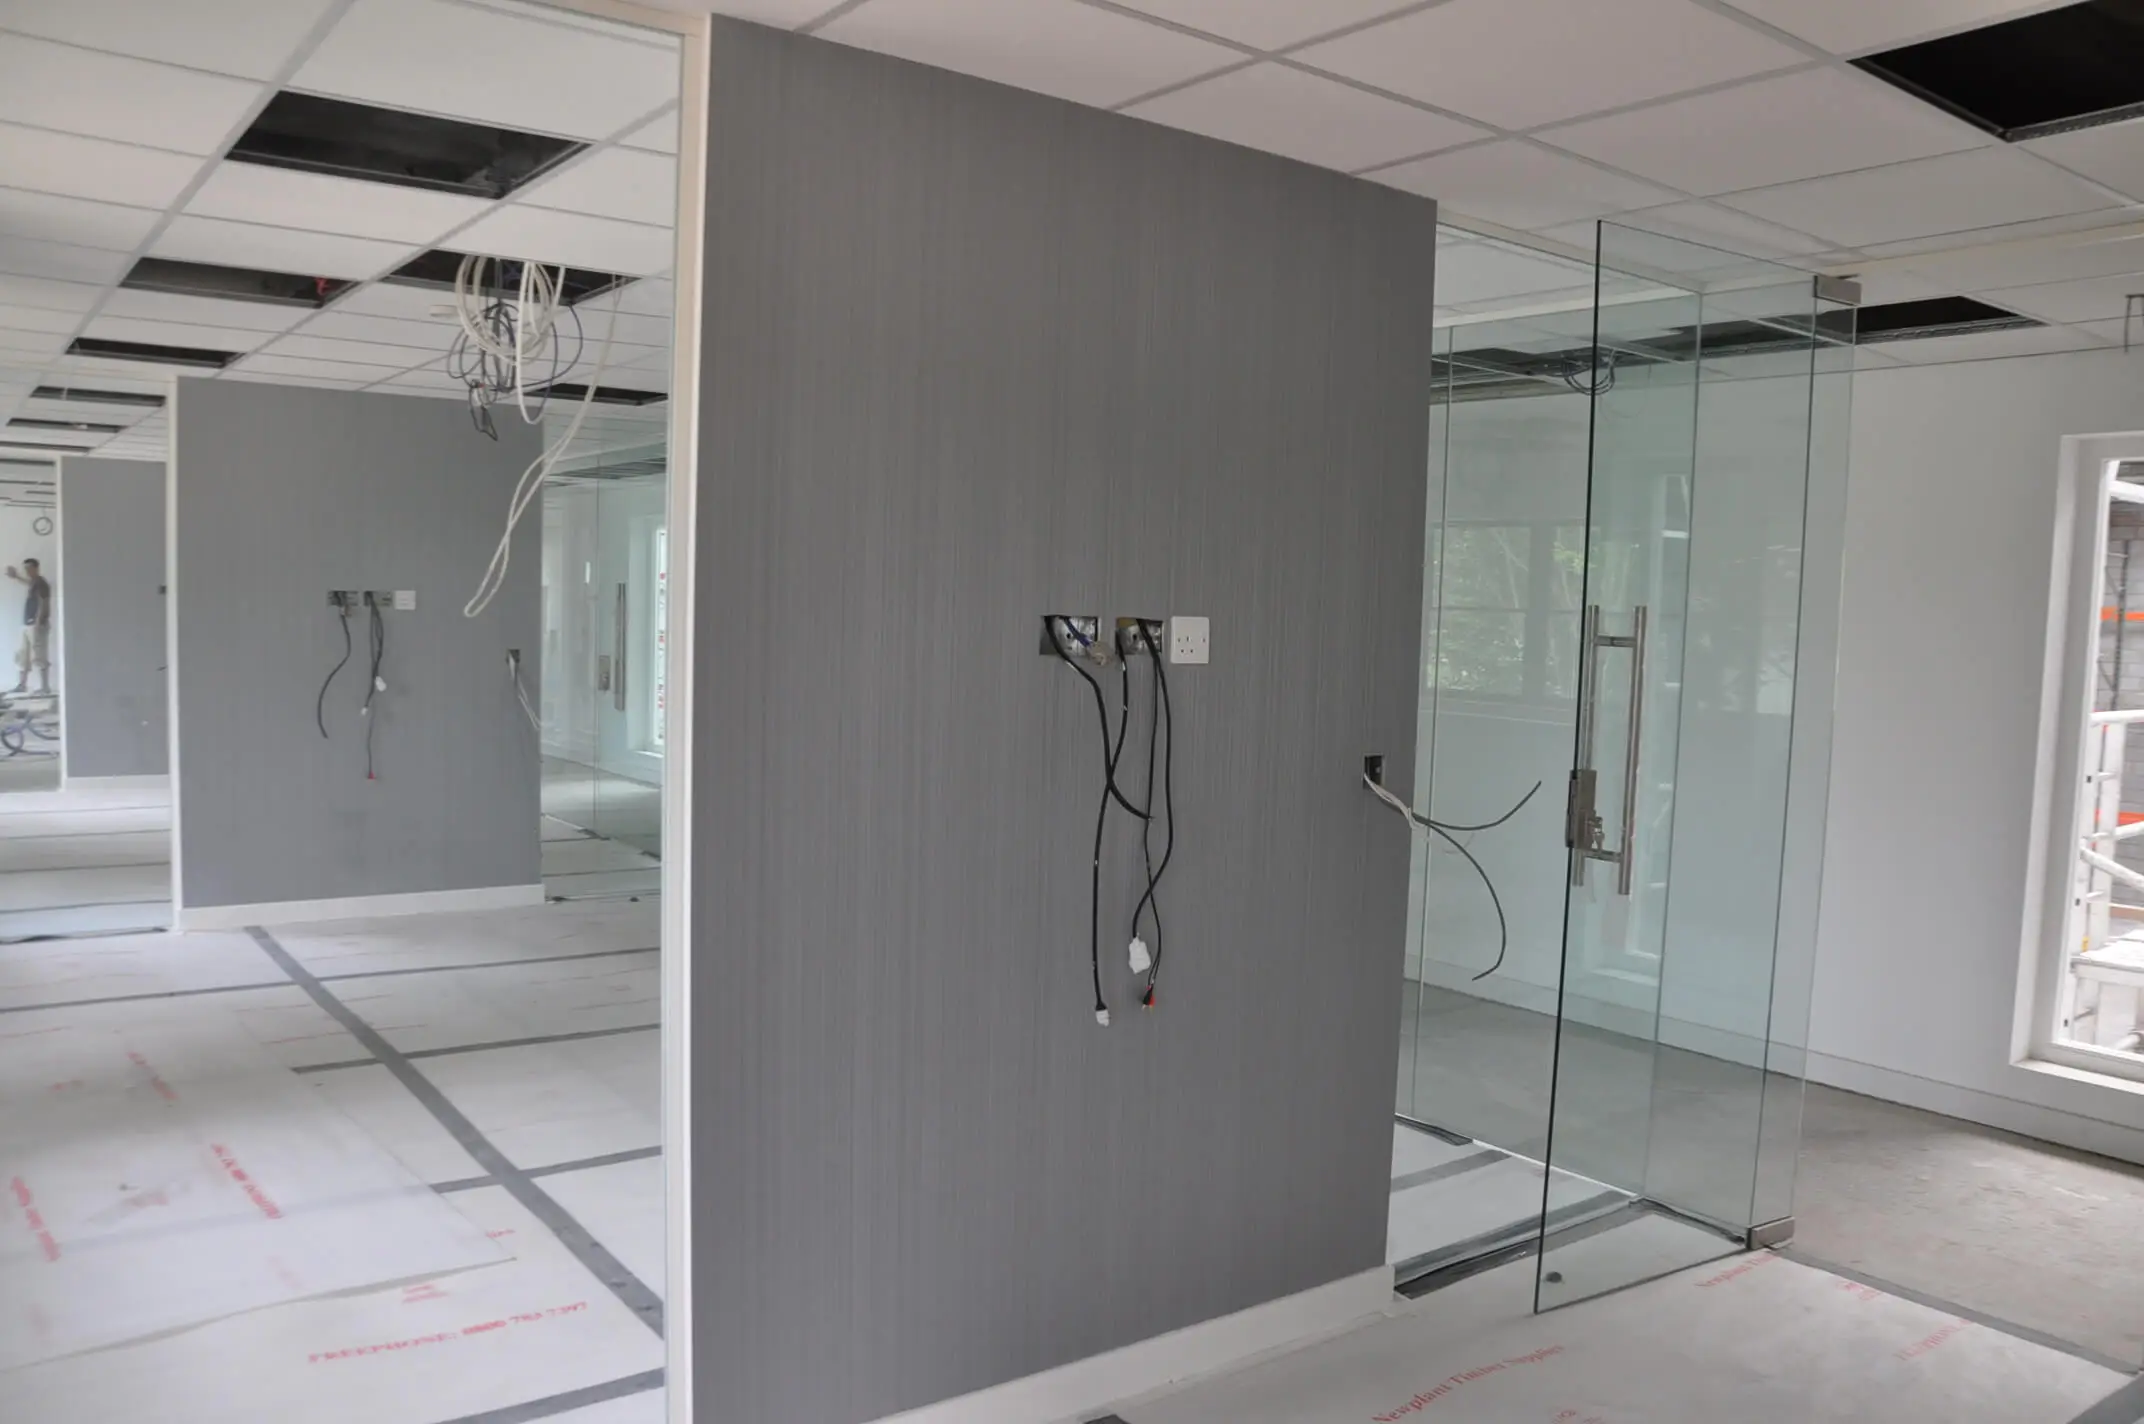 Work under construction for glass partitioning